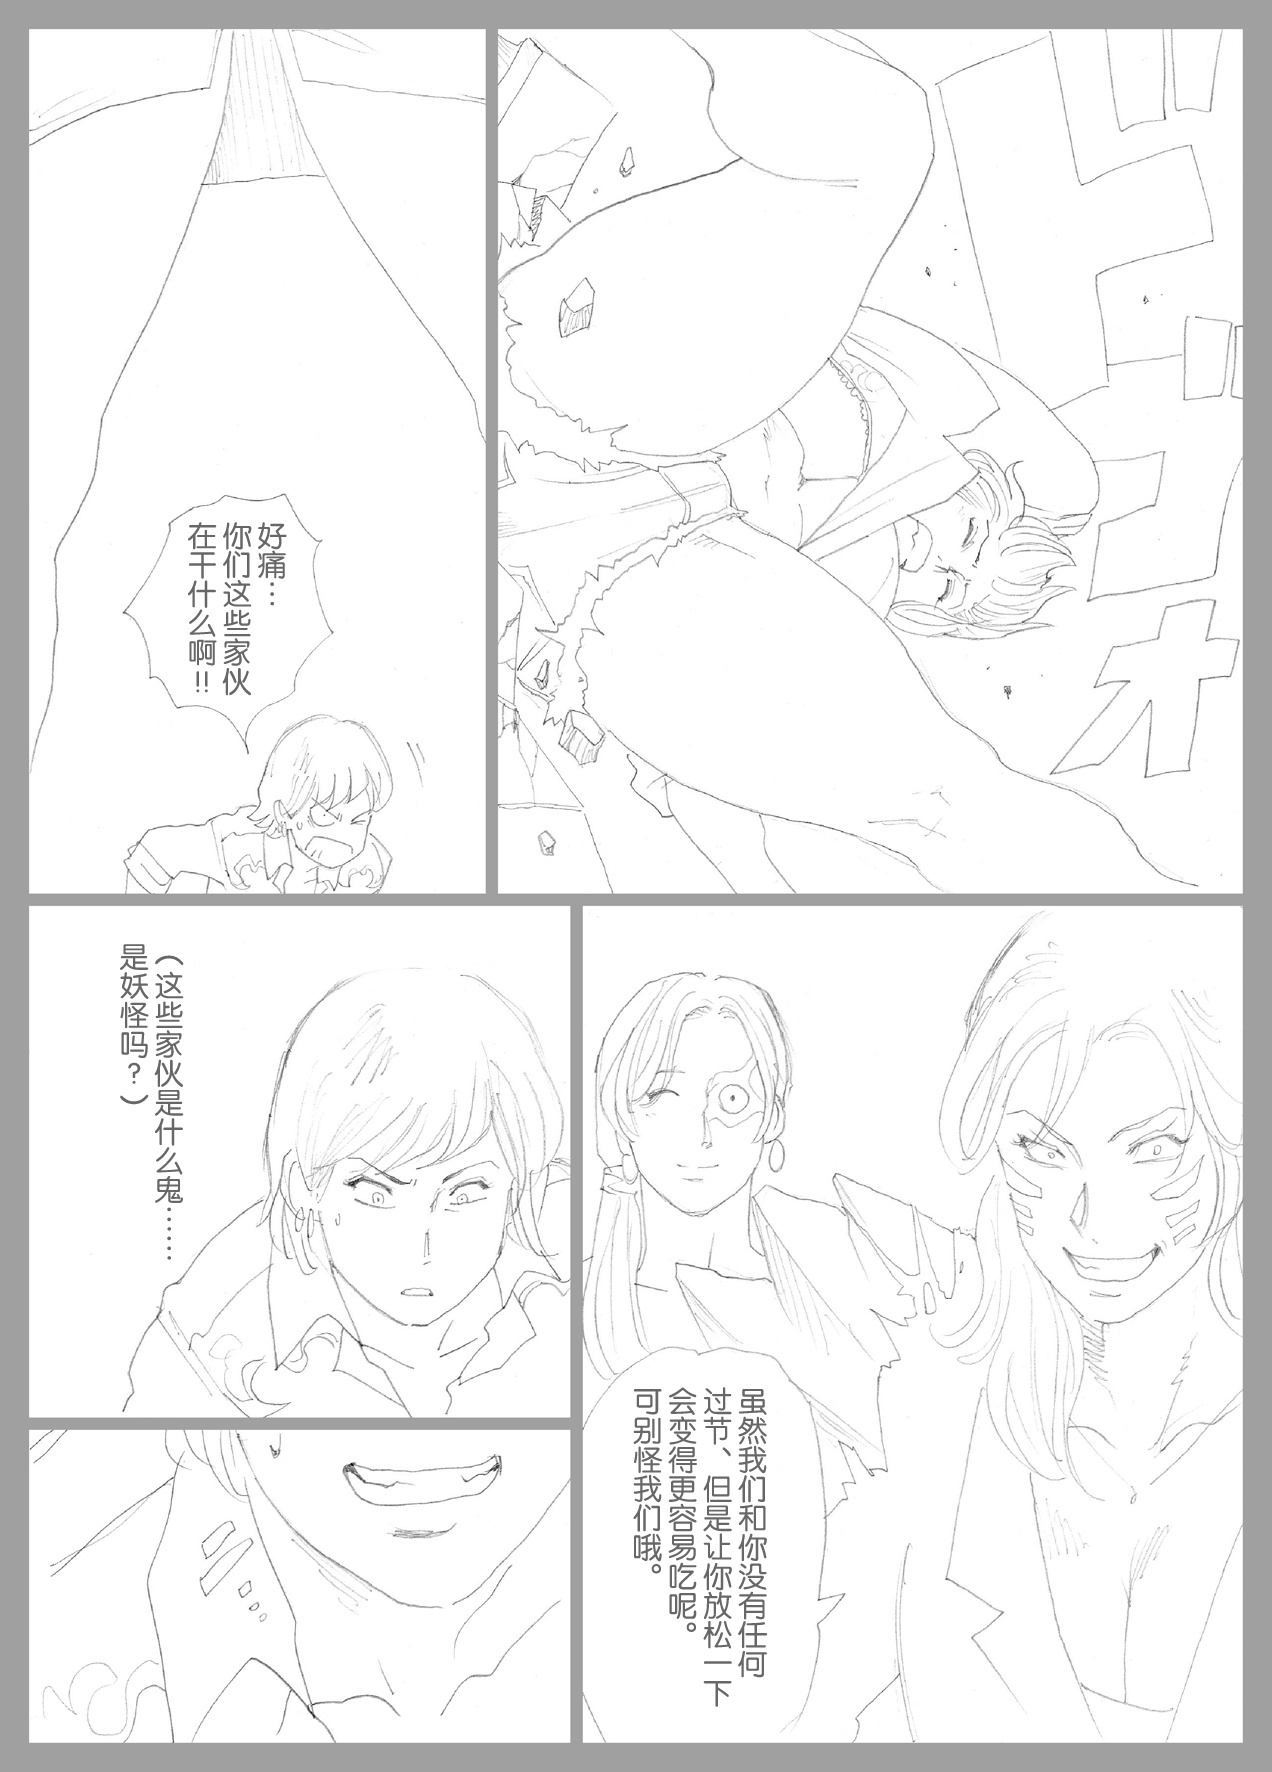 [Urban Doujin Magazine] Mousou Tokusatsu Series Ultra Madam 9 (another end) [Chinese] [不咕鸟汉化组] page 27 full